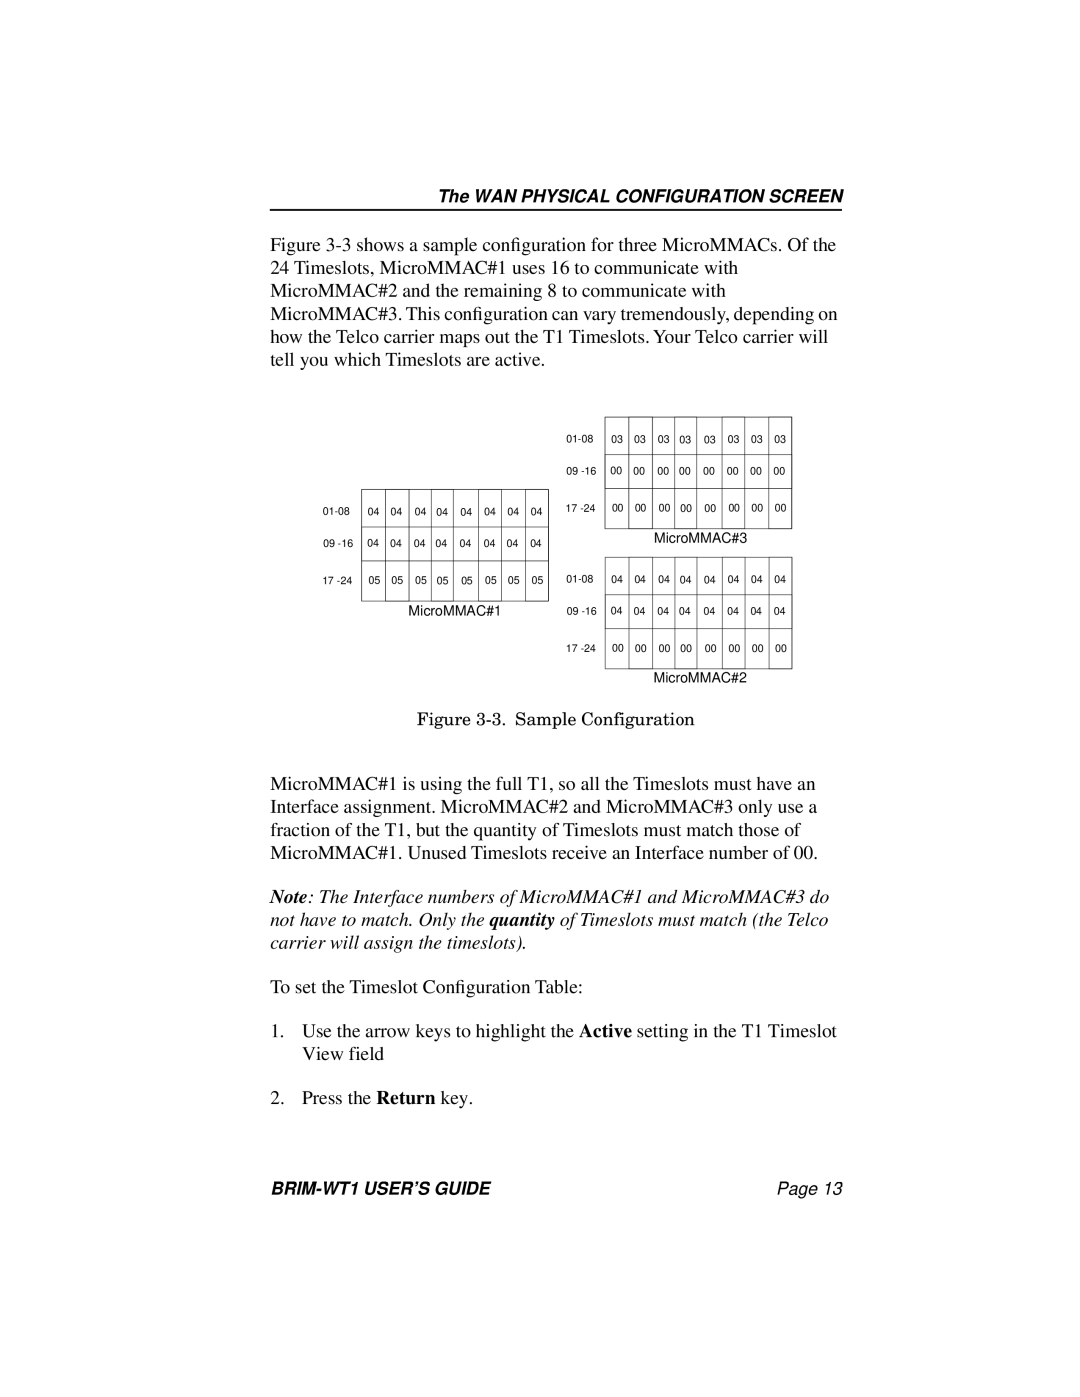 Cabletron Systems BRIM-WT1 manual To set the Timeslot Conﬁguration Table 